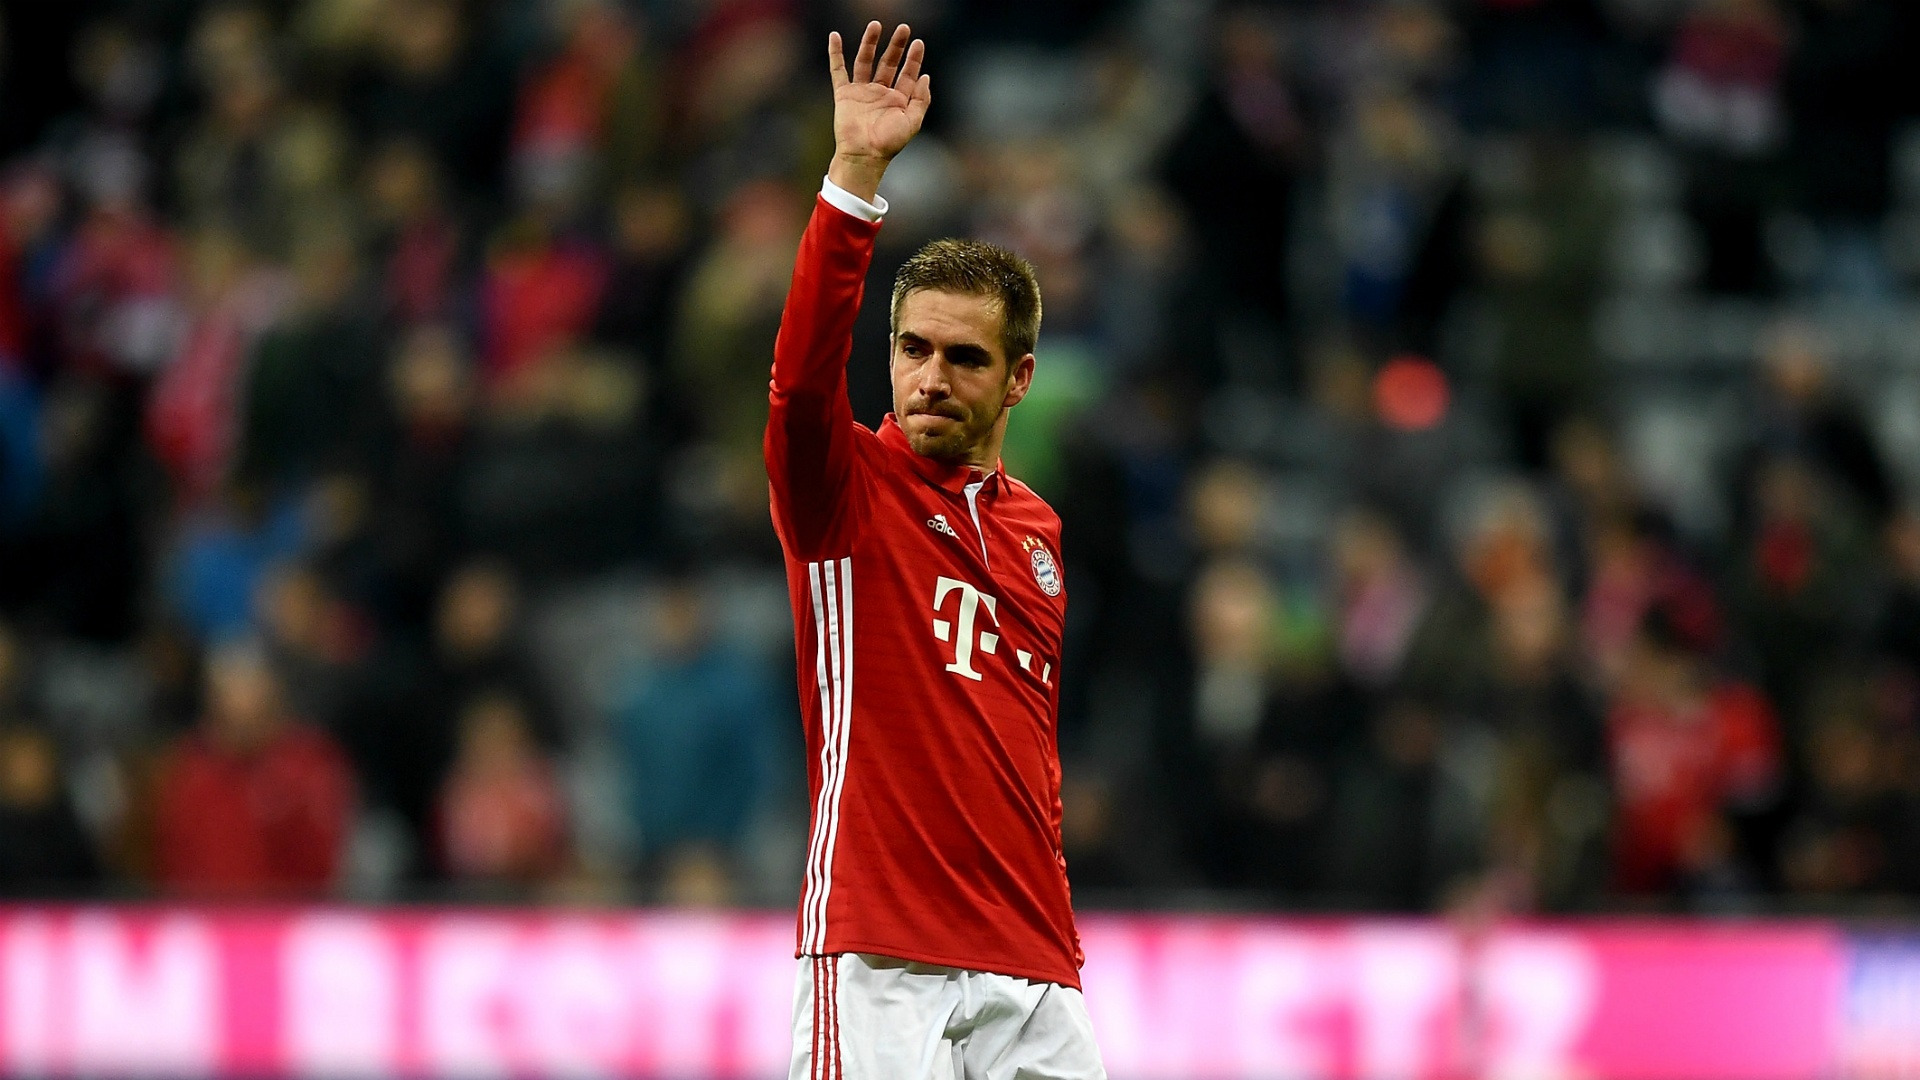 BREAKING NEWS: Lahm to retire at end of the season